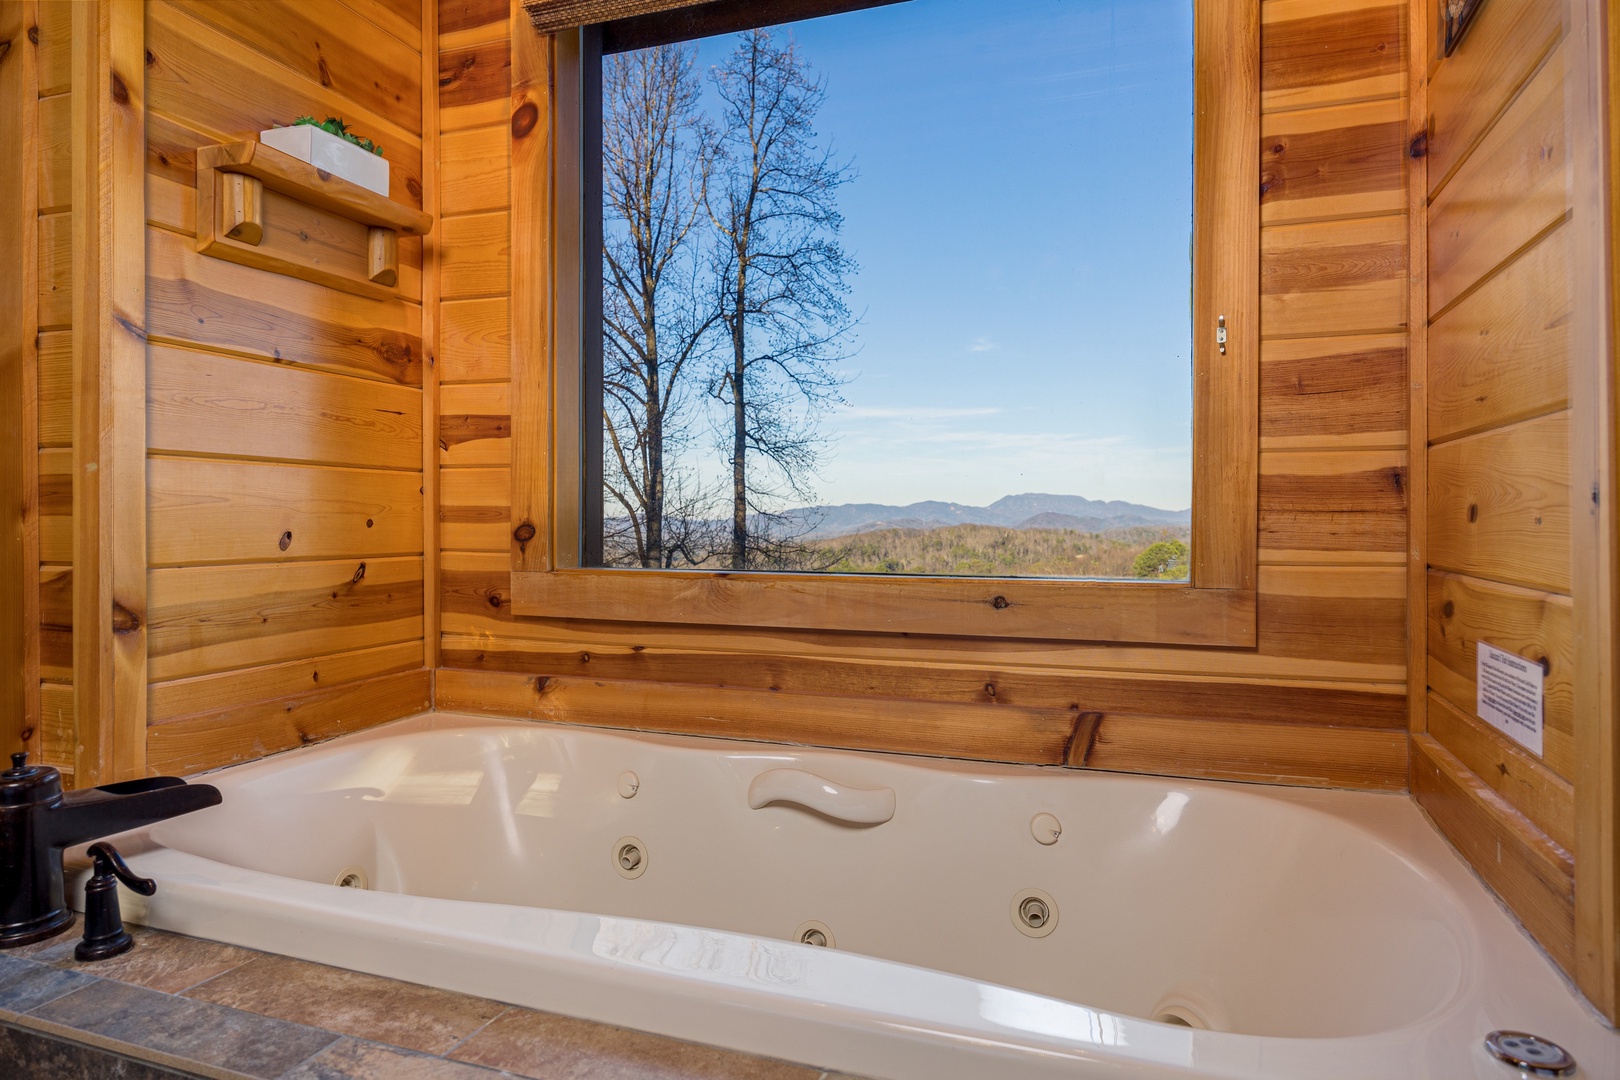 Jacuzzi with mountain view at Gone To Therapy, a 2 bedroom cabin rental located in Gatlinburg